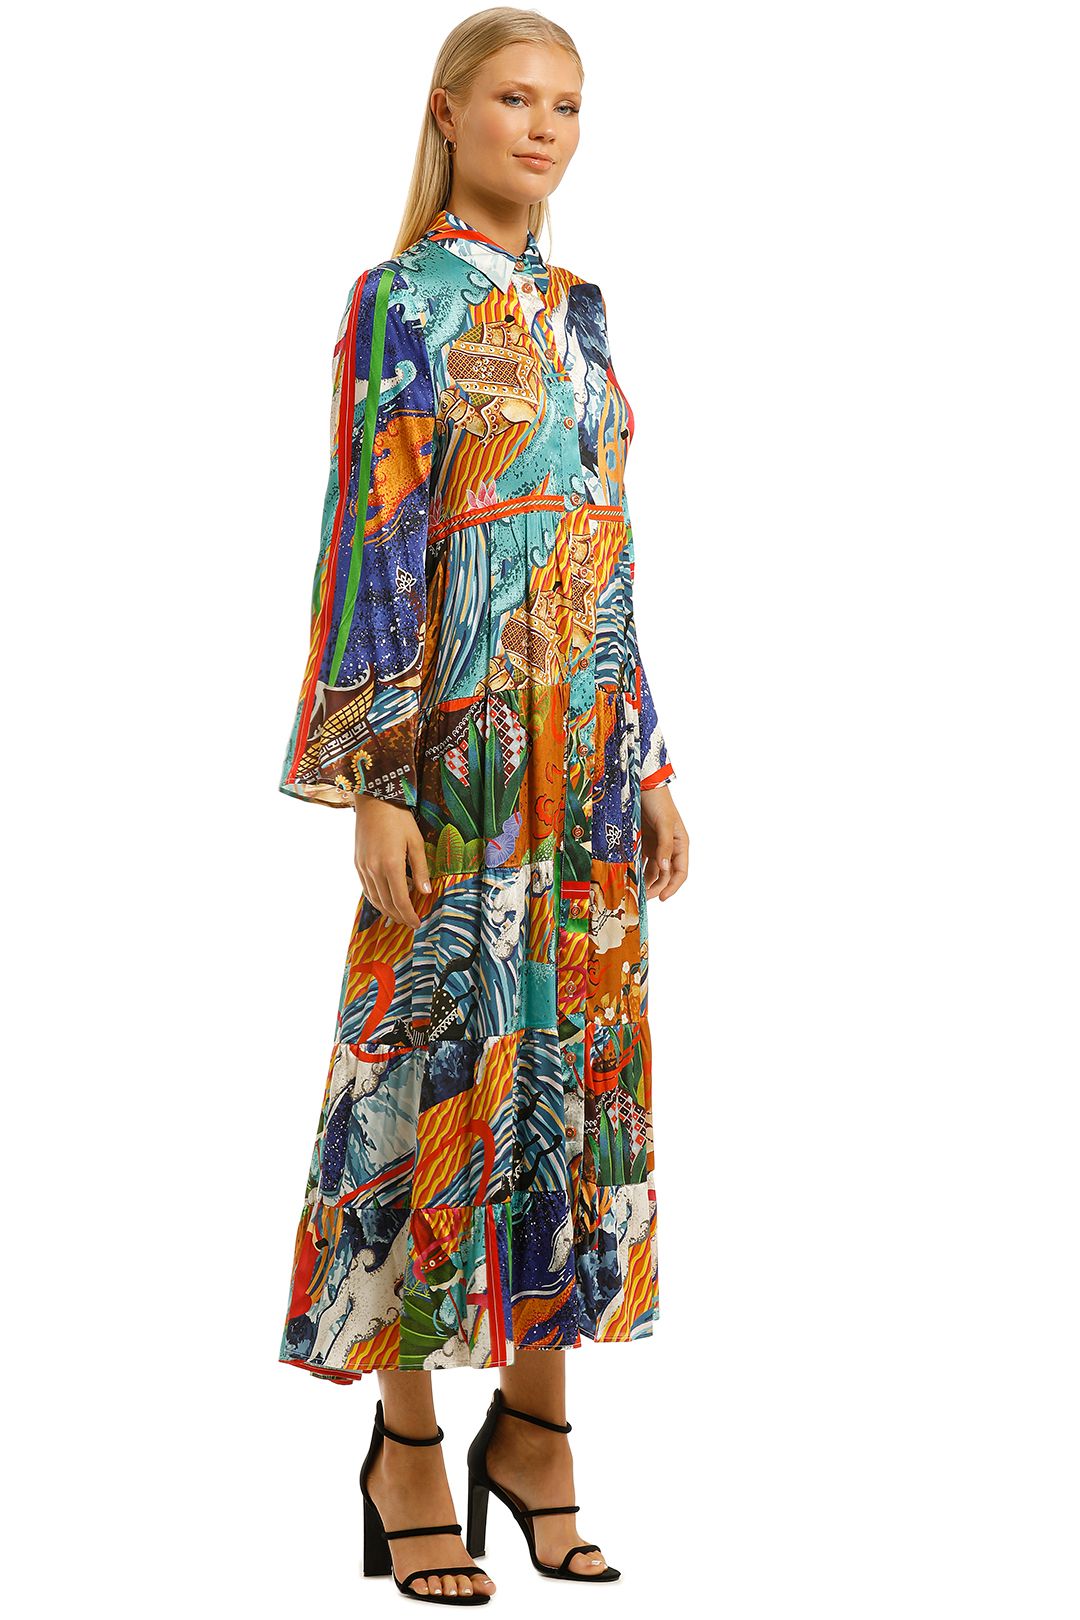 Cooper-by-Trelise-Cooper-Hunt-and-Gather-Dress-Multi-Print-Side